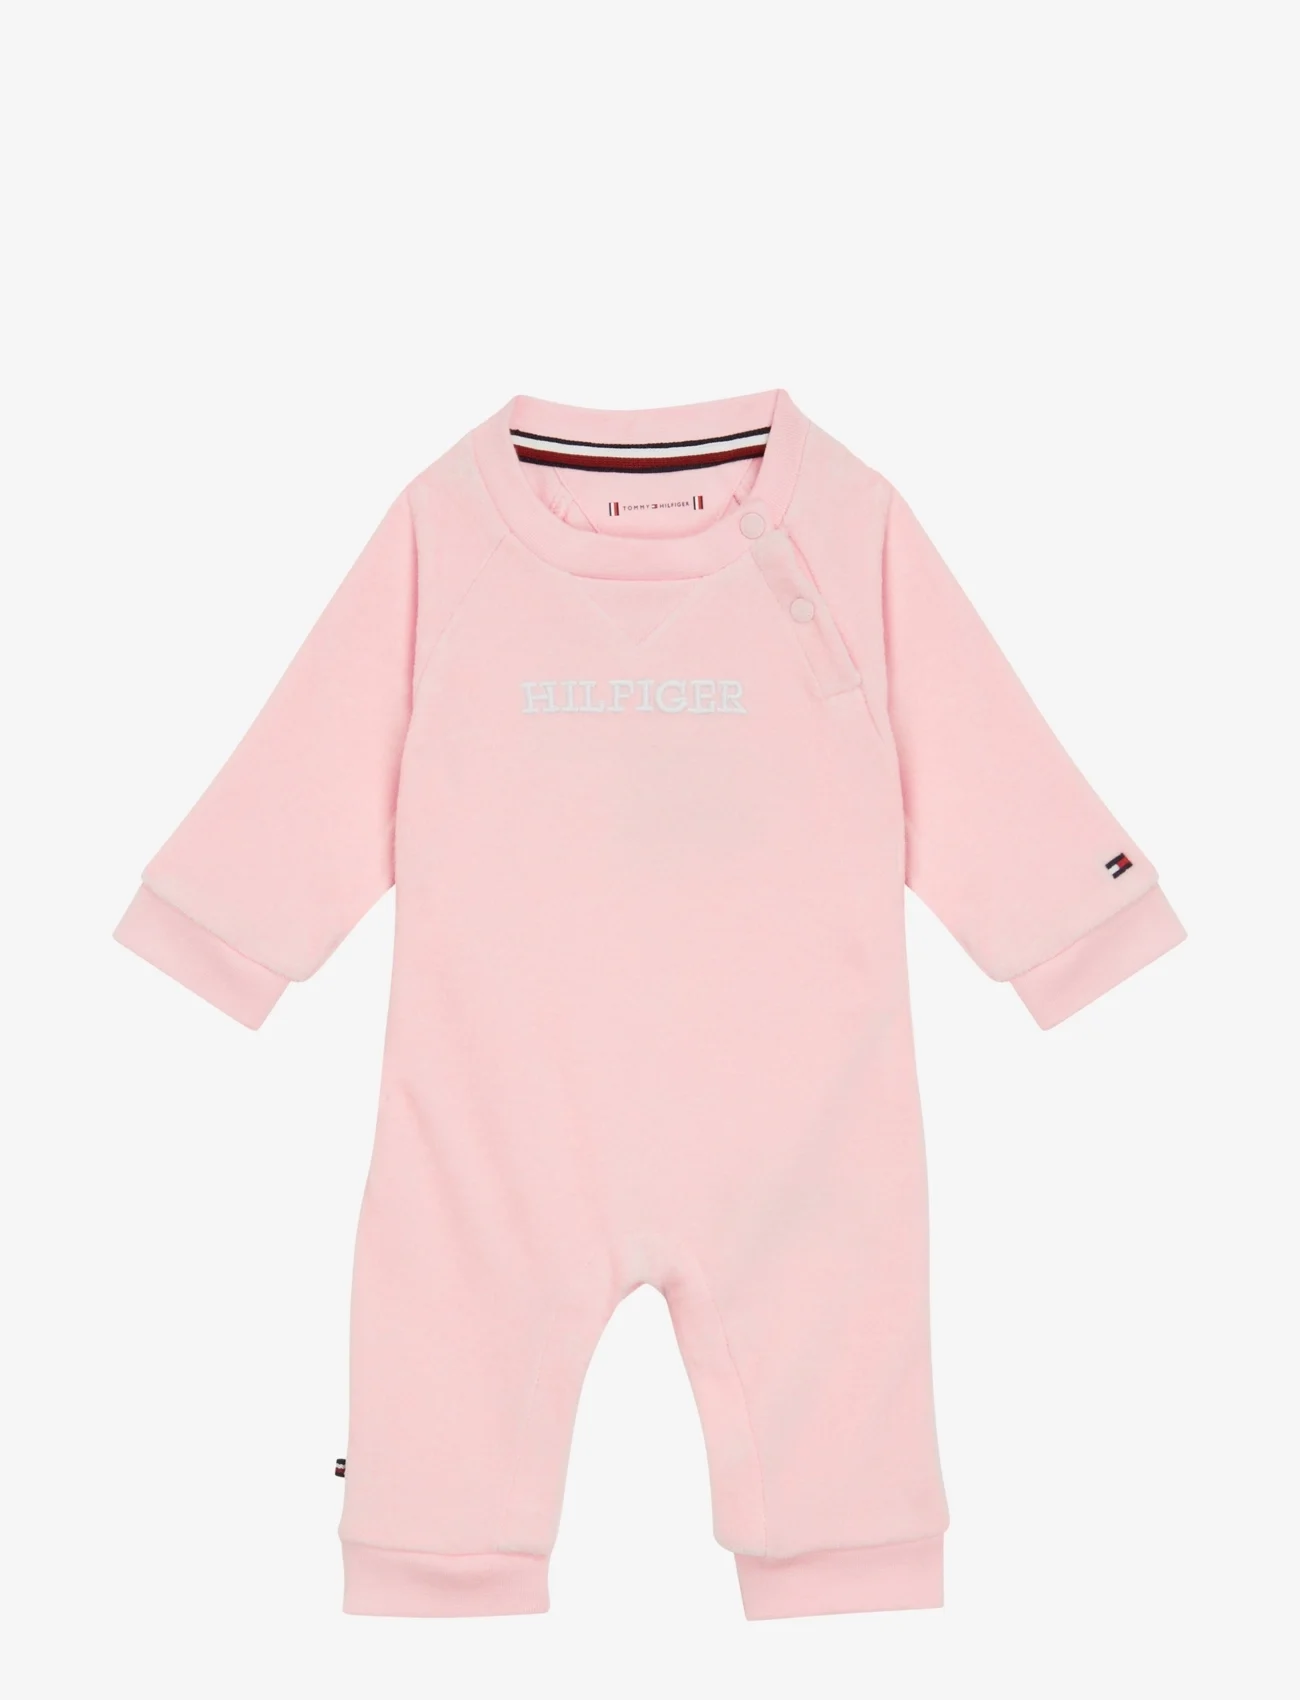 Tommy Hilfiger - BABY CURVED MONOTYPE COVERALL - langærmede - pink crystal - 0